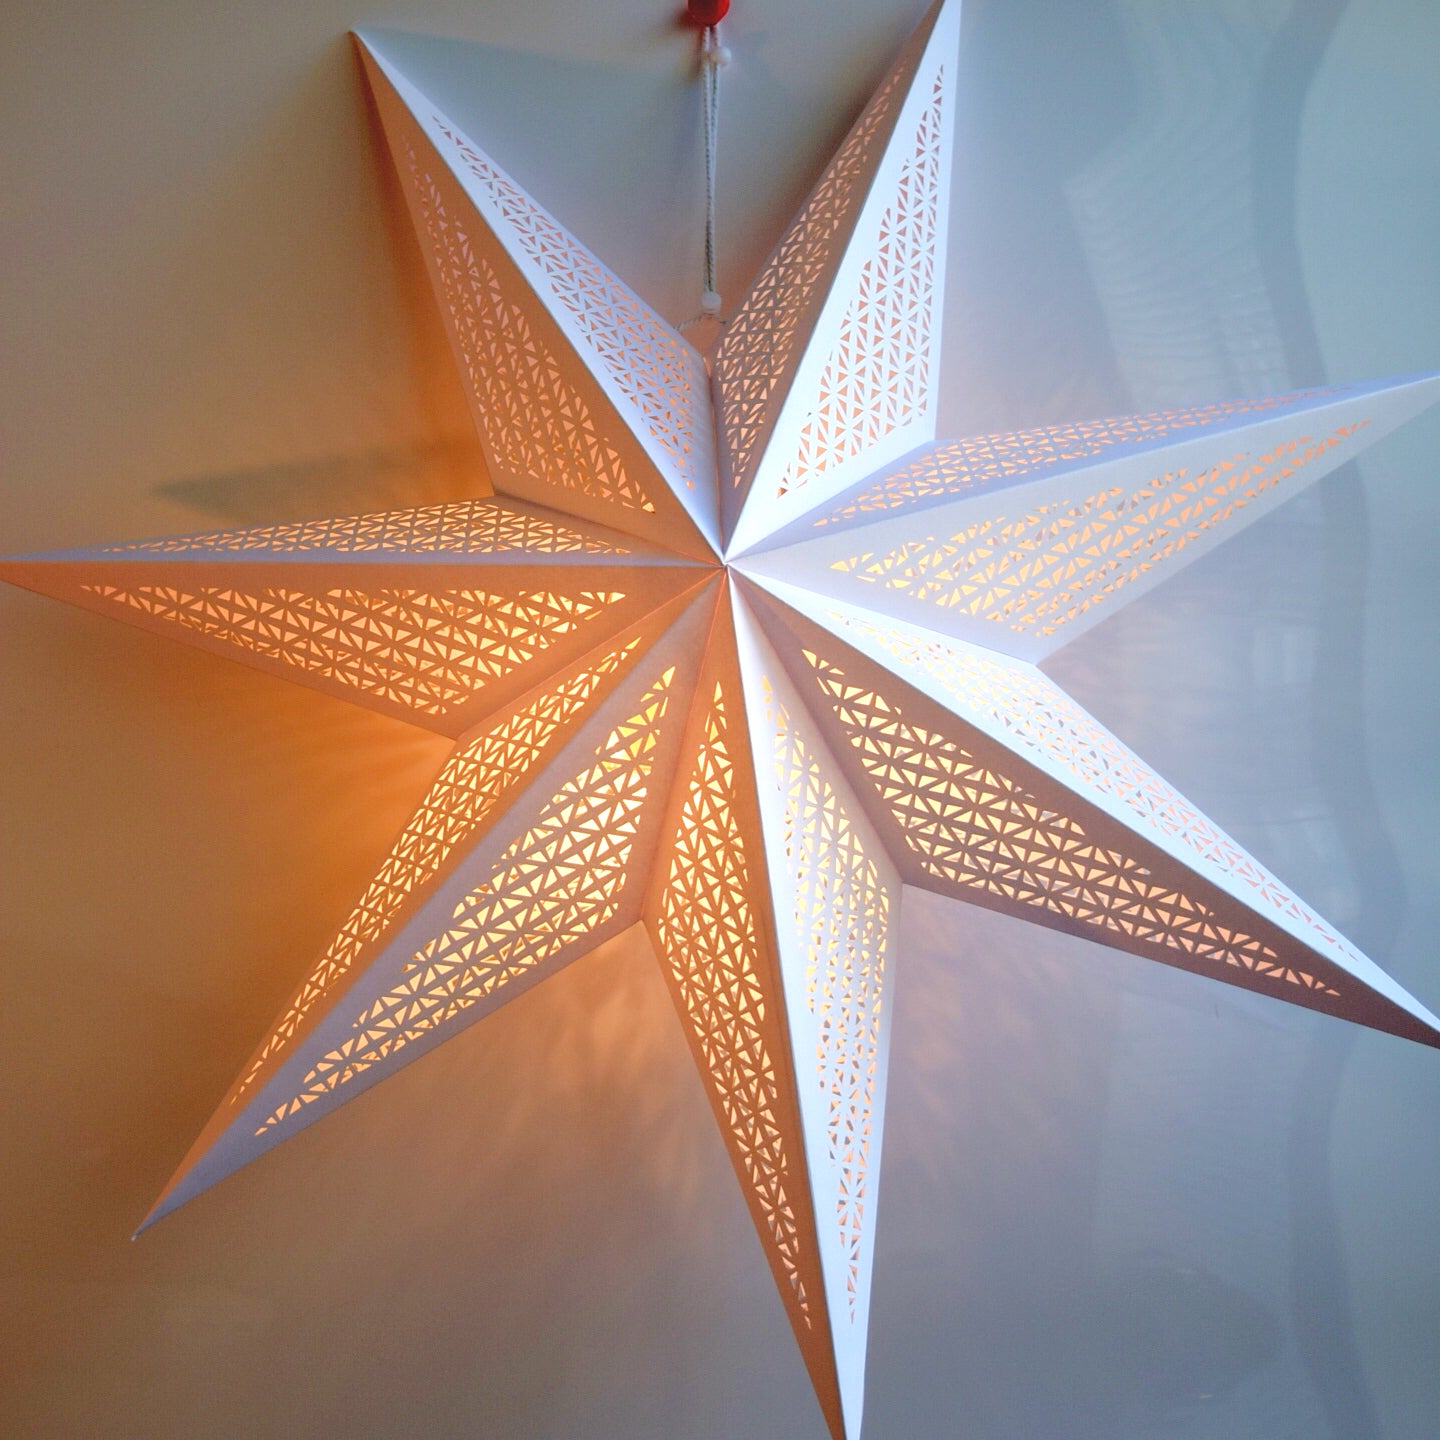 Paper Star Lantern Decoration (Cosmic White 7-Point Lighted Star) - WillBrite.com - Gifts & Décor that Make People Happy